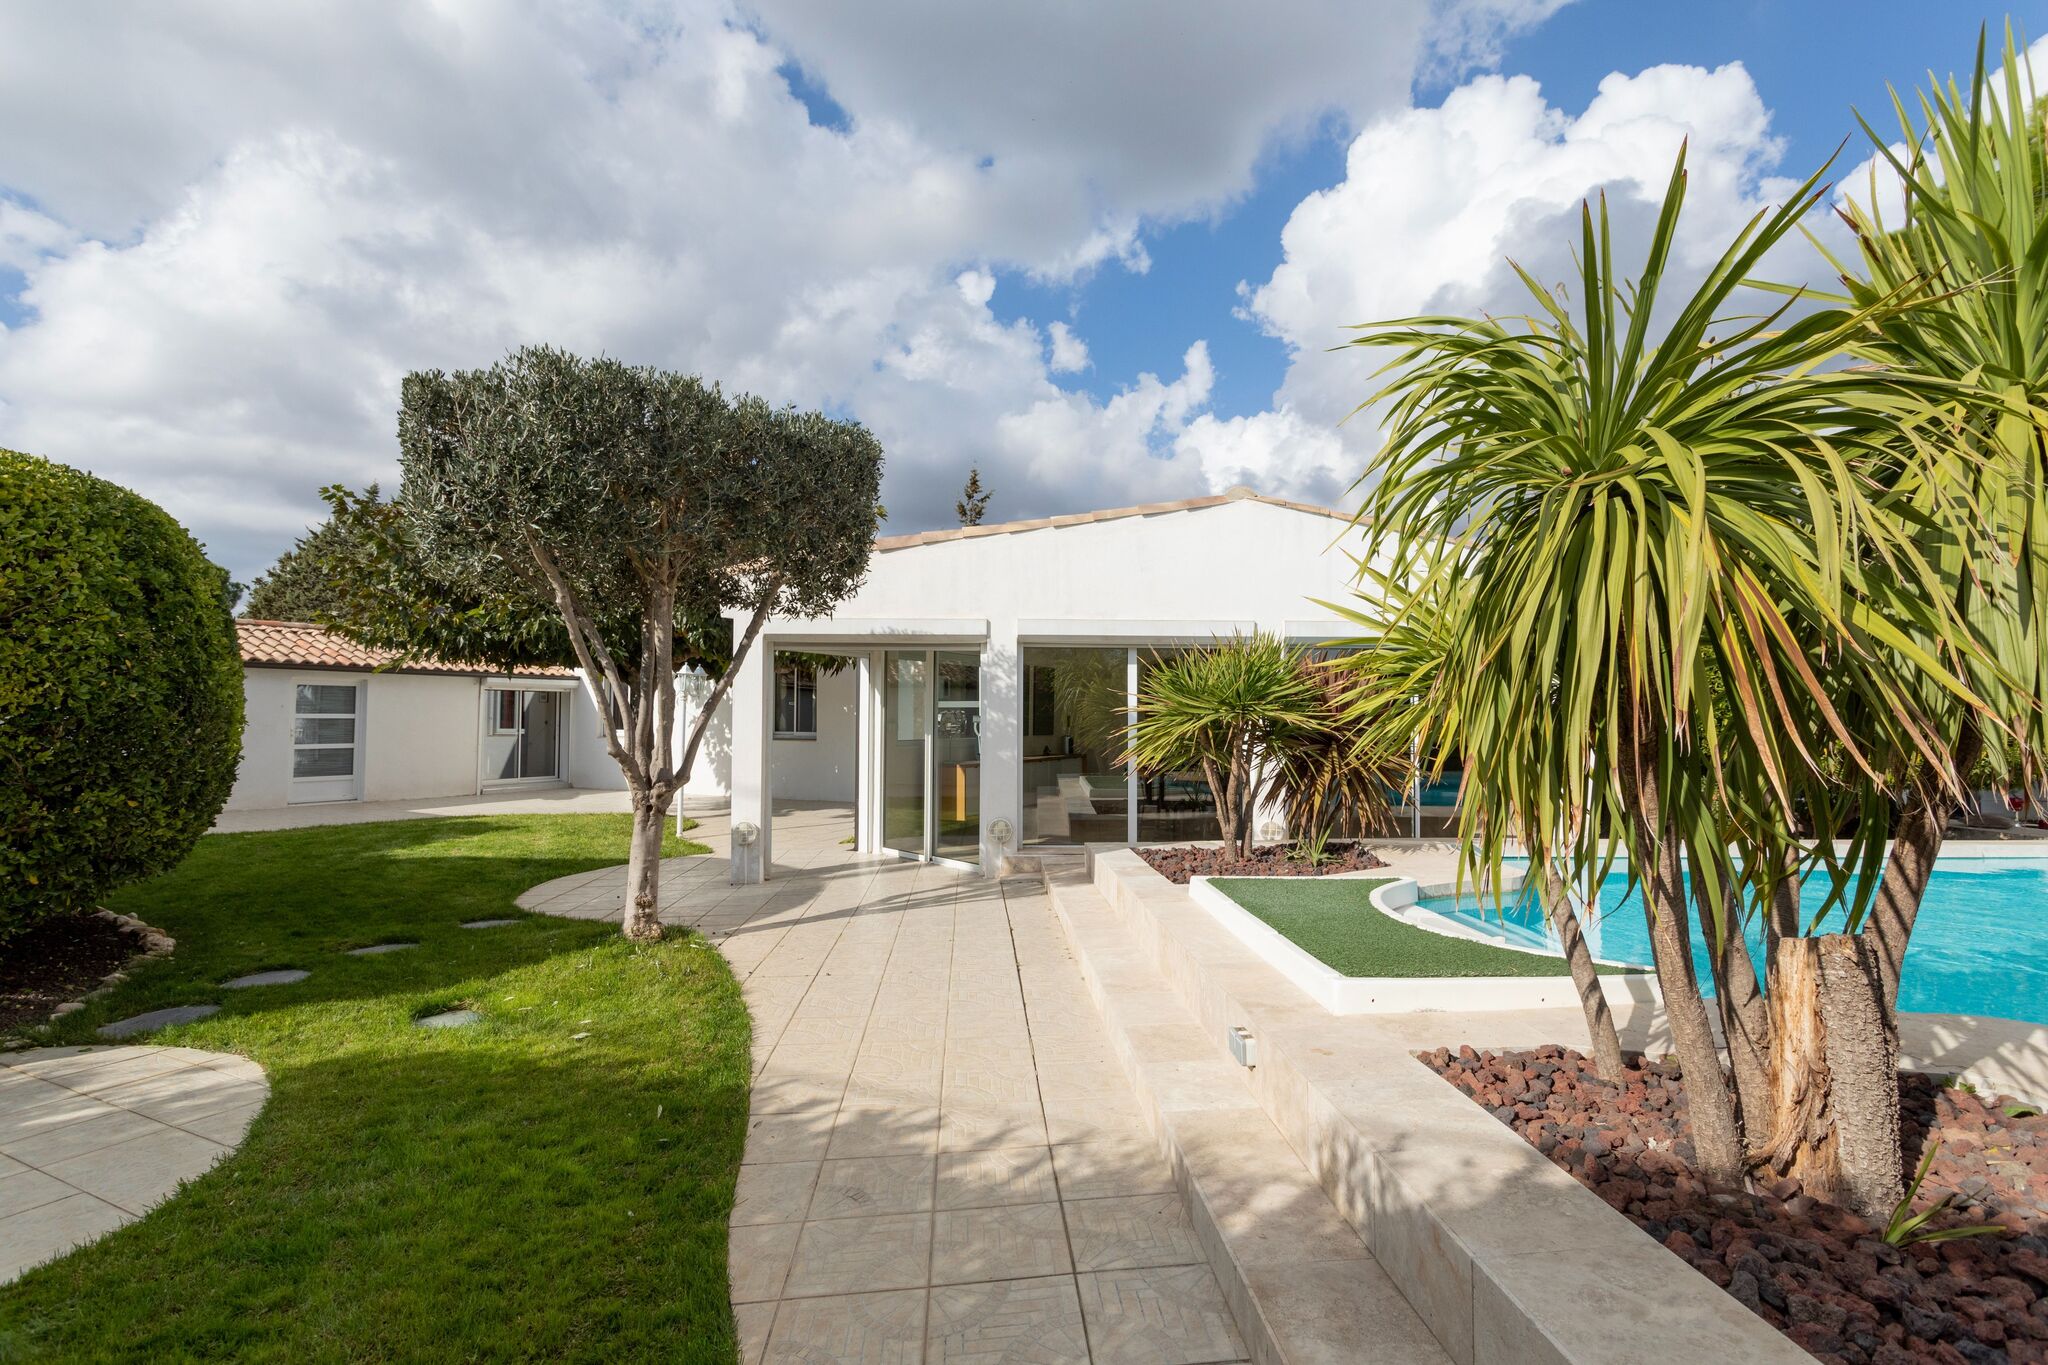 Luxurious villa in Narbonne with private pool